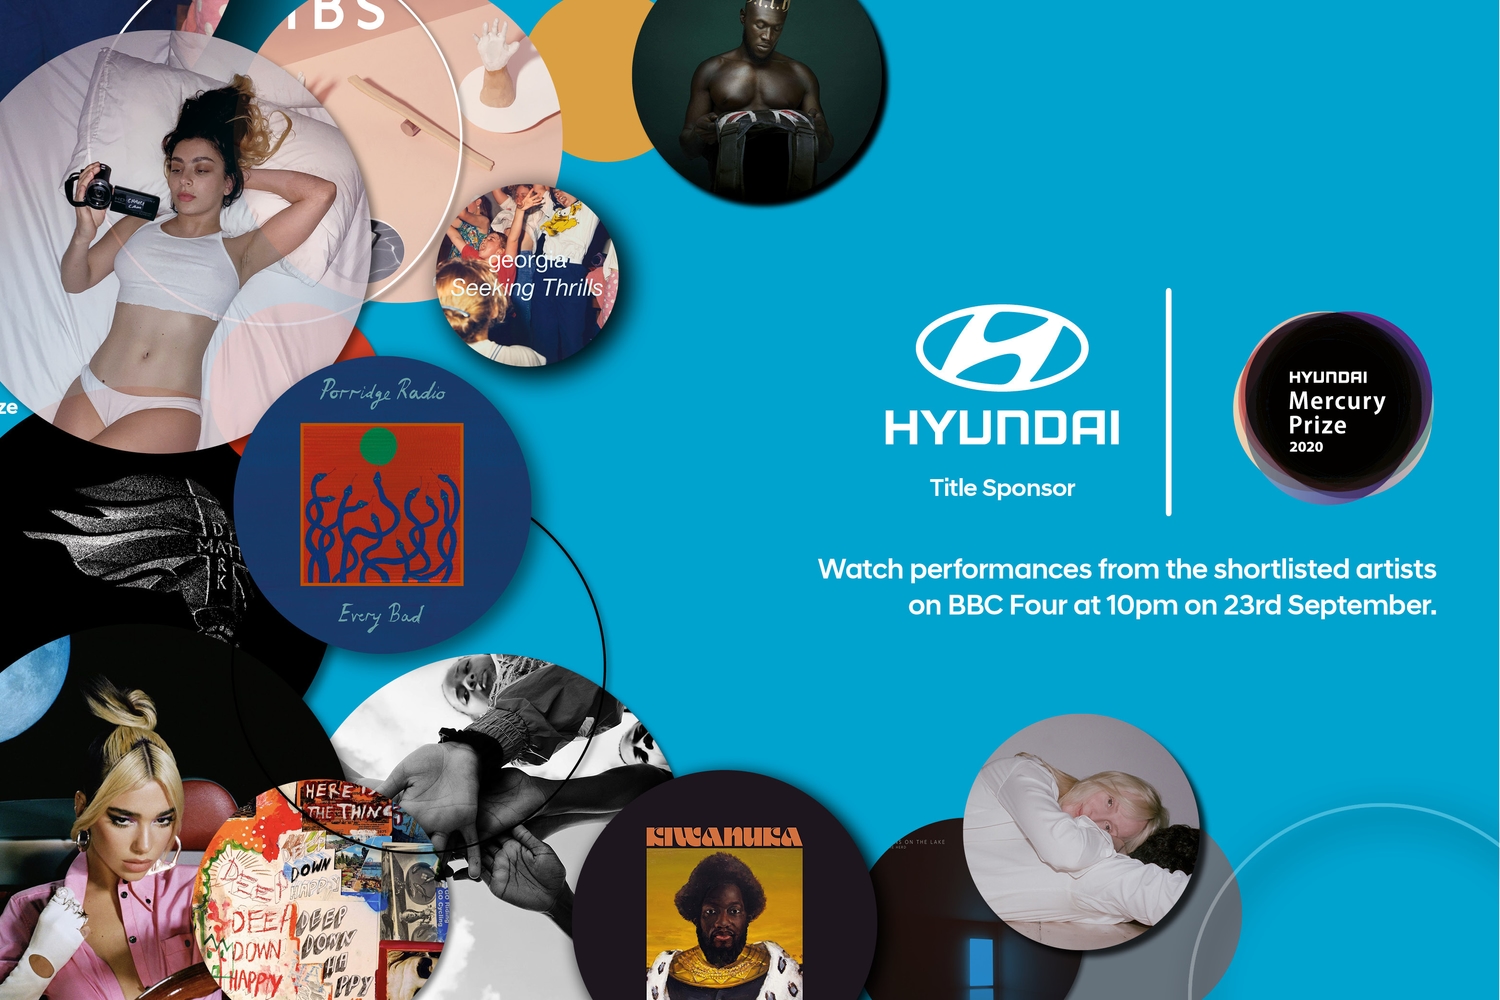 What to expect from the 2020 Hyundai Mercury Prize